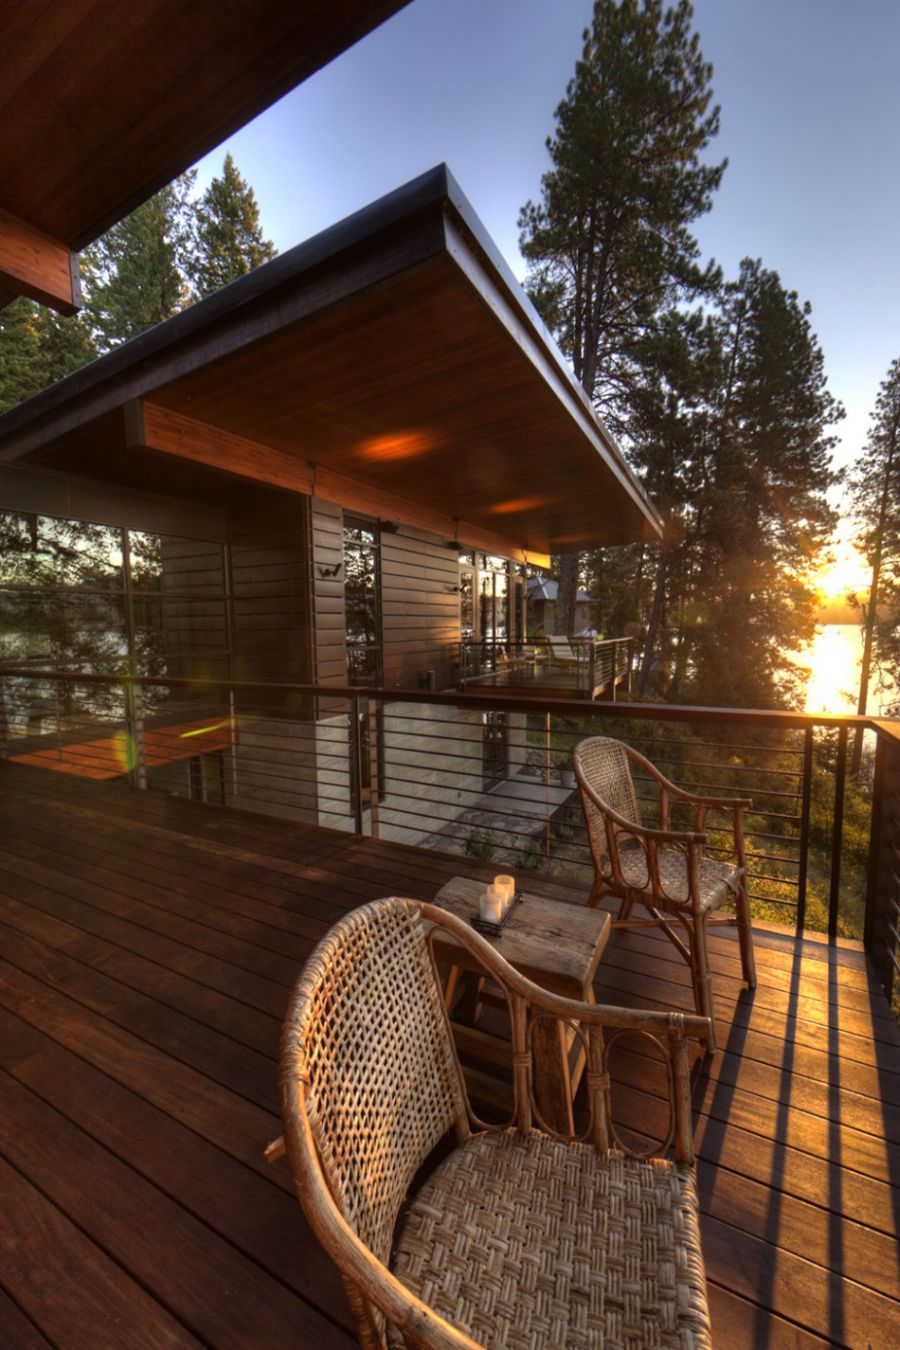 View of setting sun from the deck of Coeur D’Alene Lake house